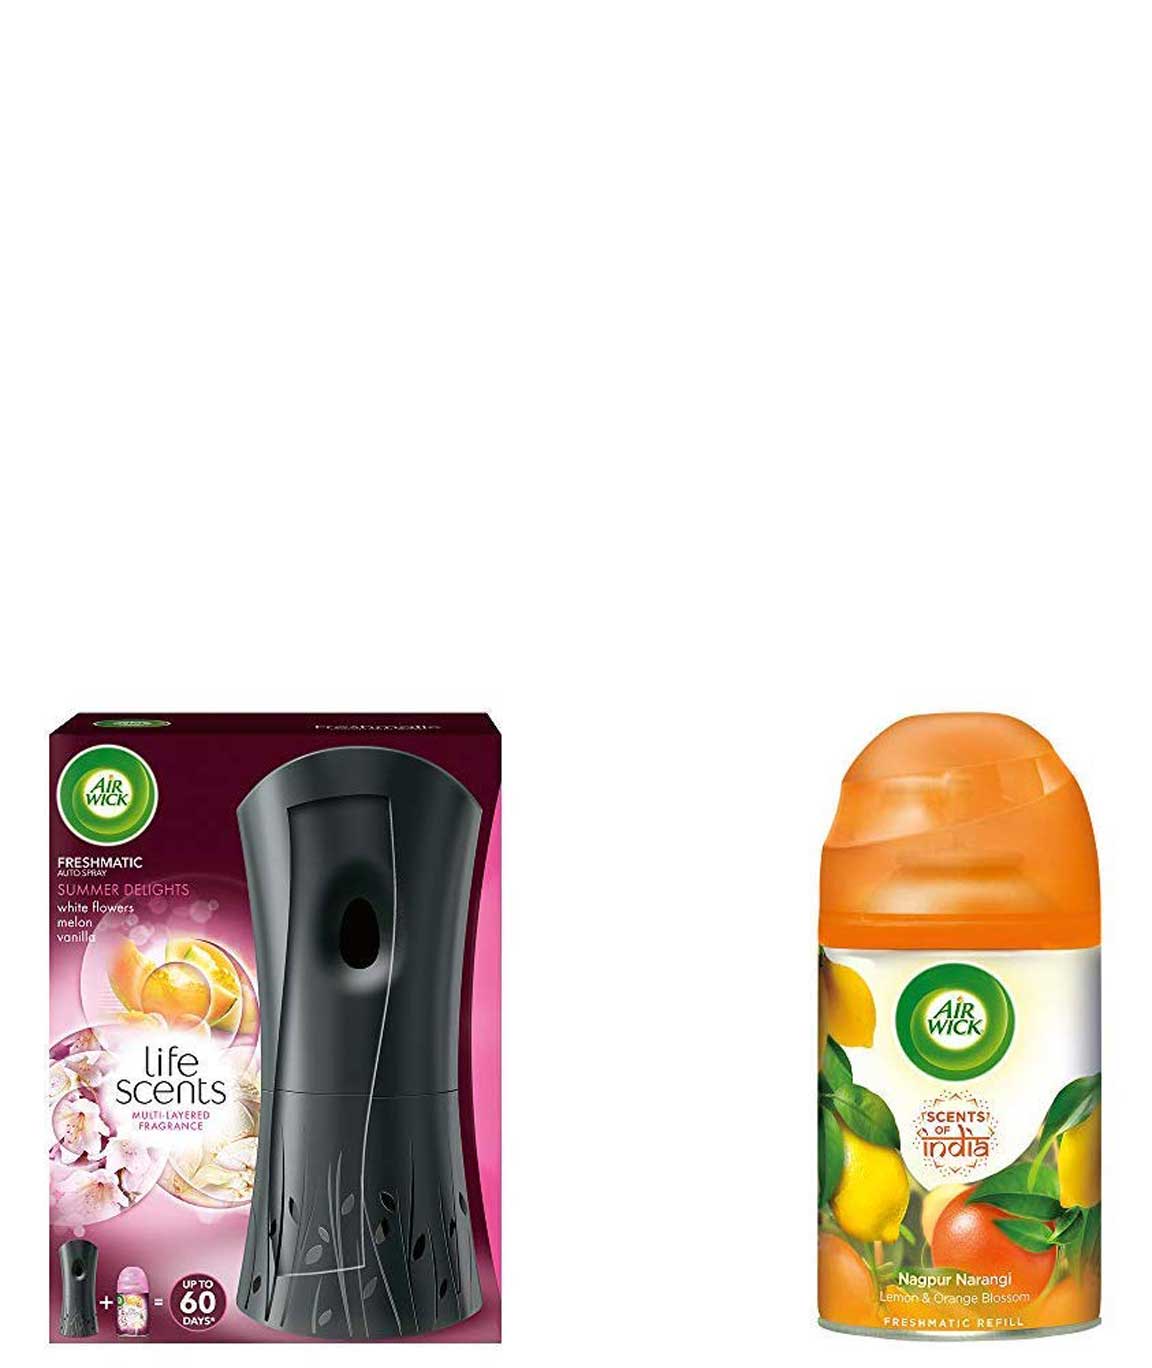 Airwick Freshmatic Complete Kit - Automatic Air Freshener - Summer Delights (250 ml) & Scents of India Freshmatic Air Freshener Refill - 250 ml (Nagpur Narangi) Combo